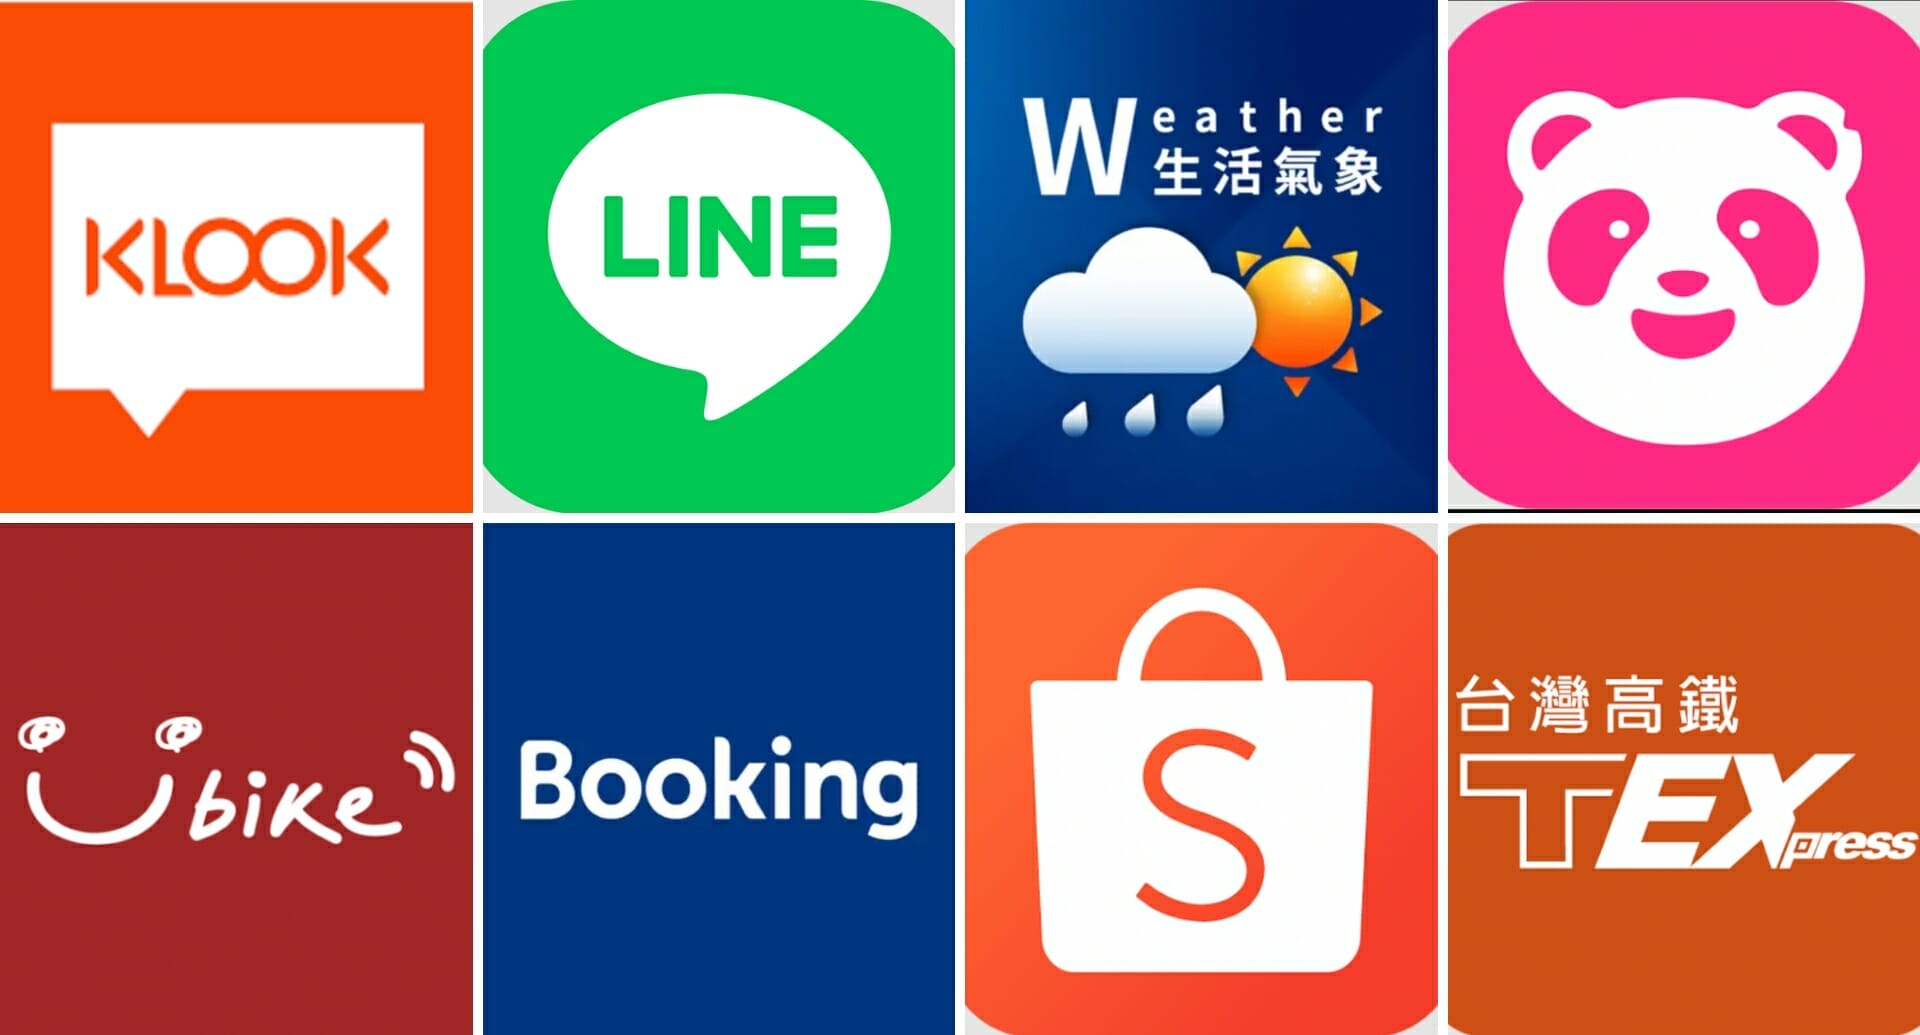 The best Taiwan apps for traveling, shopping, dating, food, and more